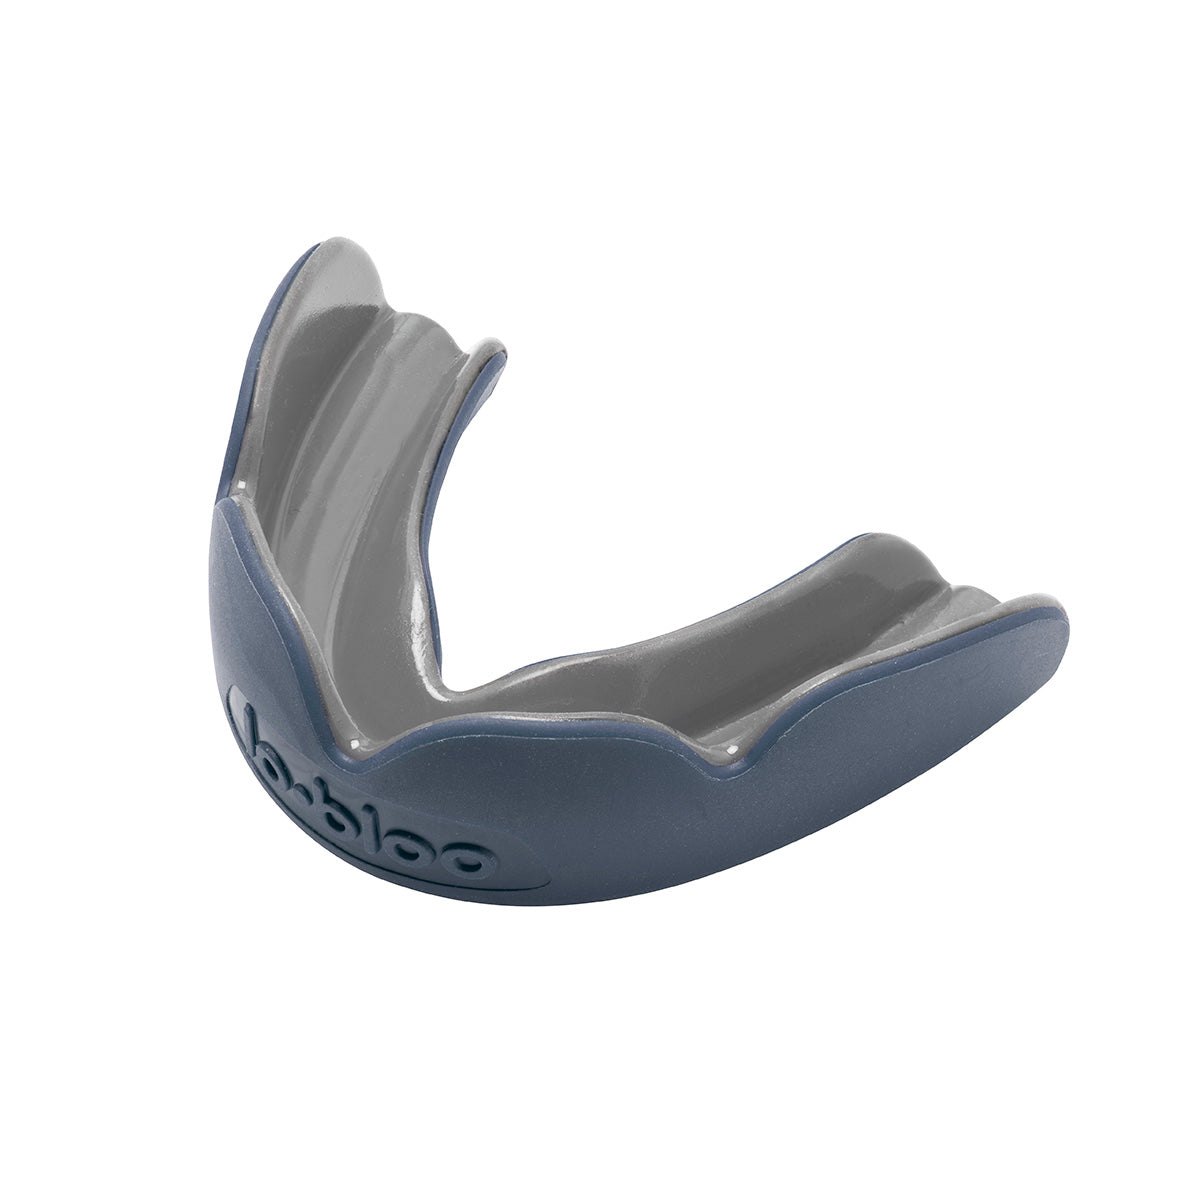 lobloo® PRO-FIT impressionless dual-density mouthguard